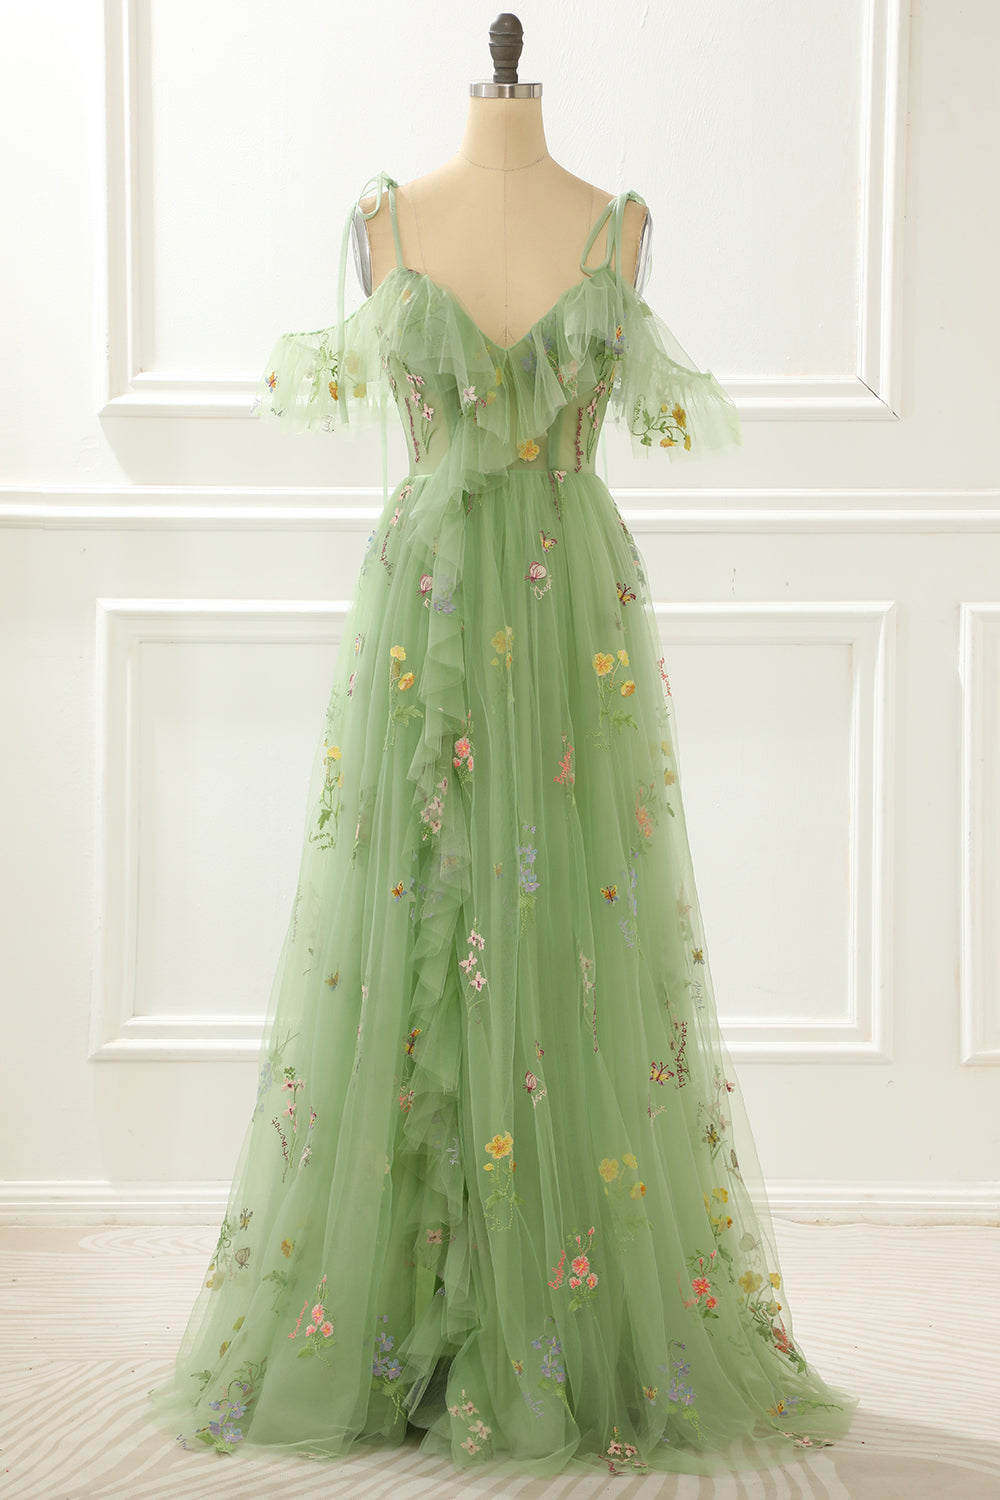 Bridesmaid Dresses Shop, A-Line Embroidery Green Prom Dress with Slit